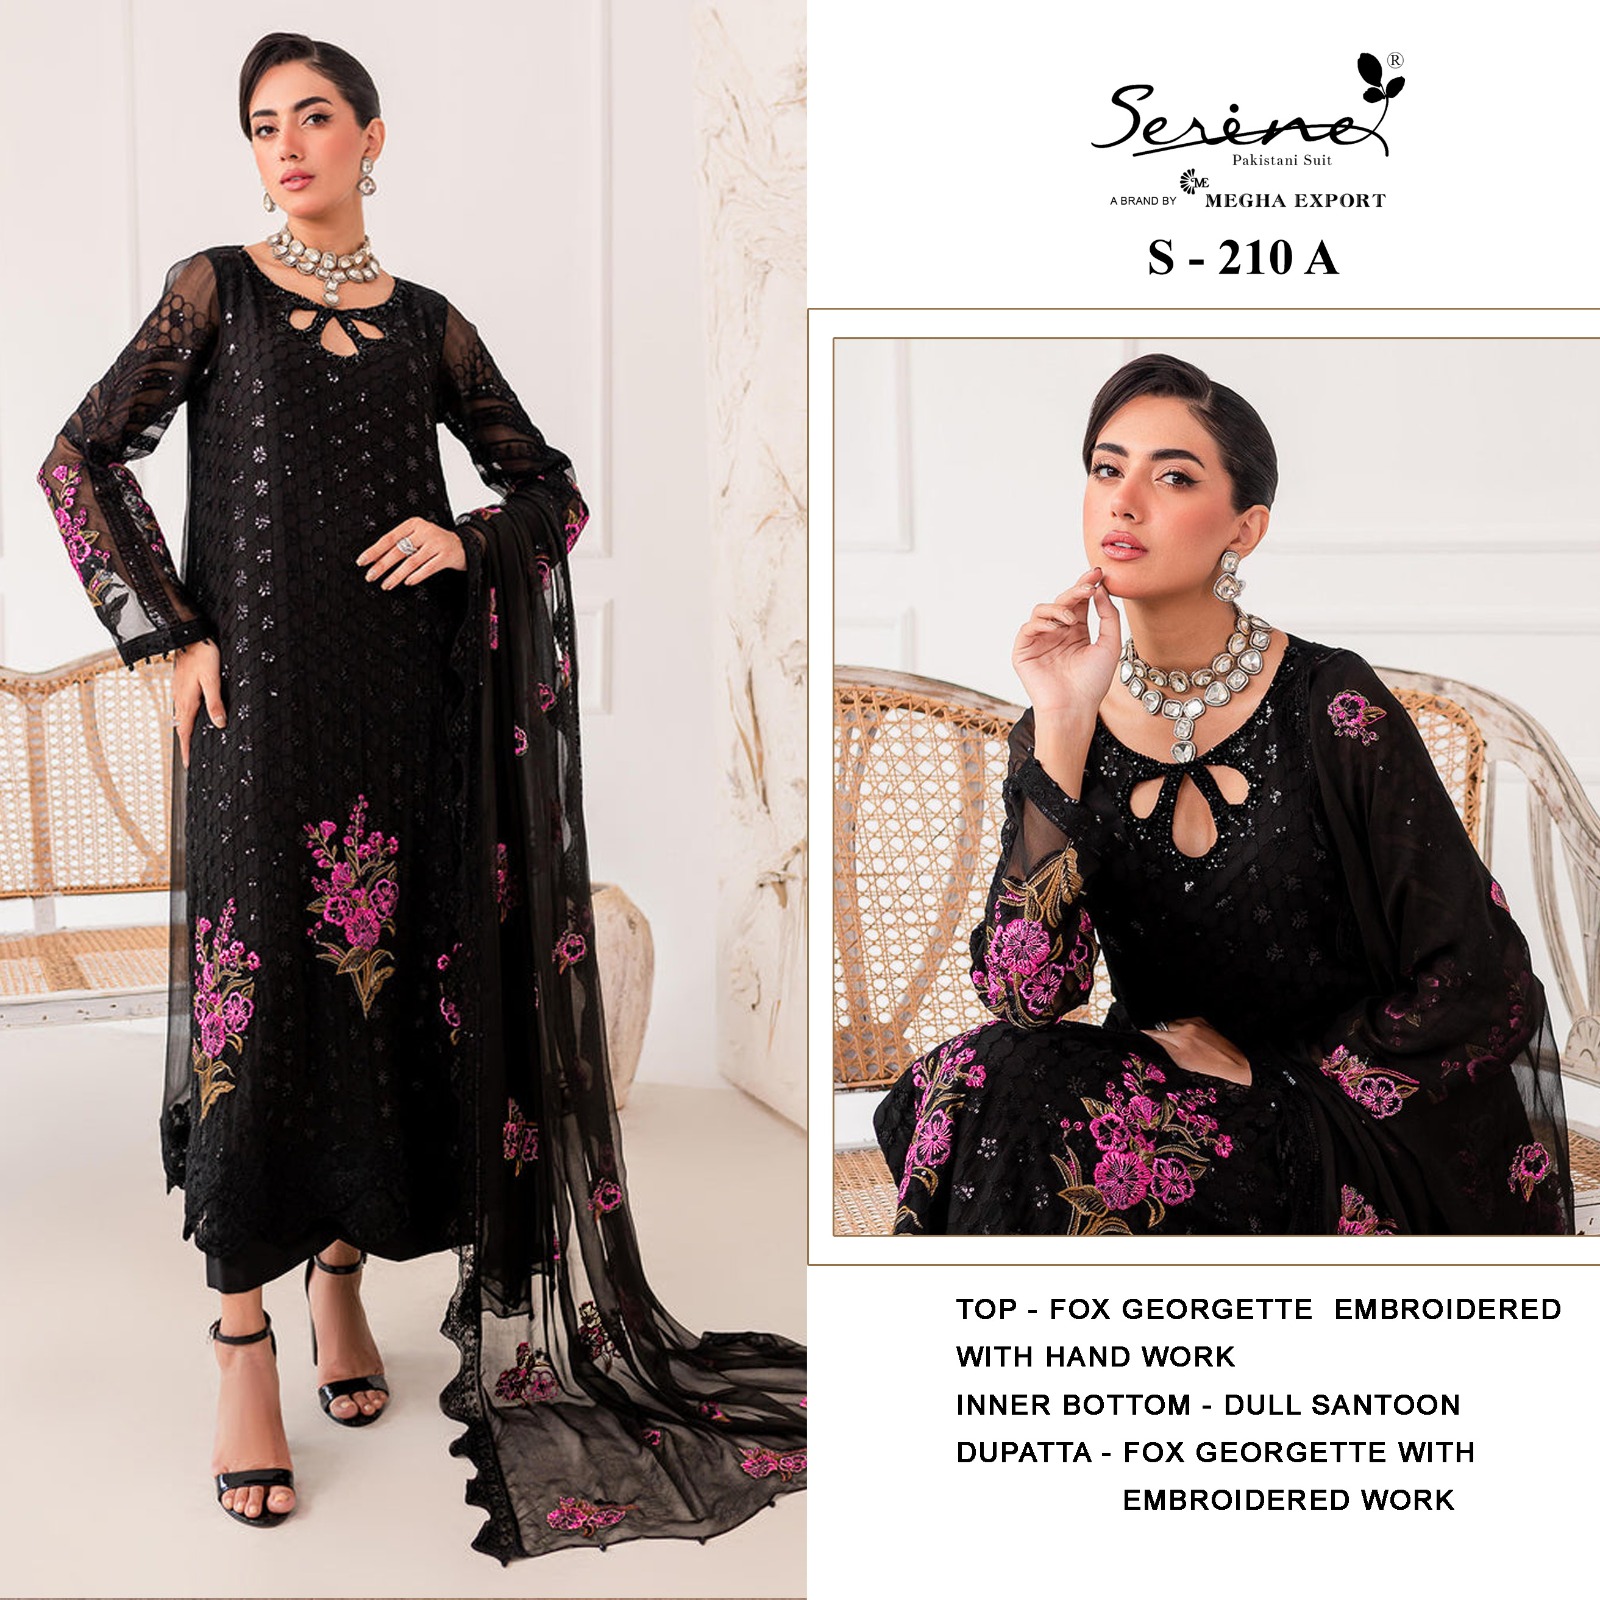 SERINE S 210 A PAKISTANI SUITS IN INDIA